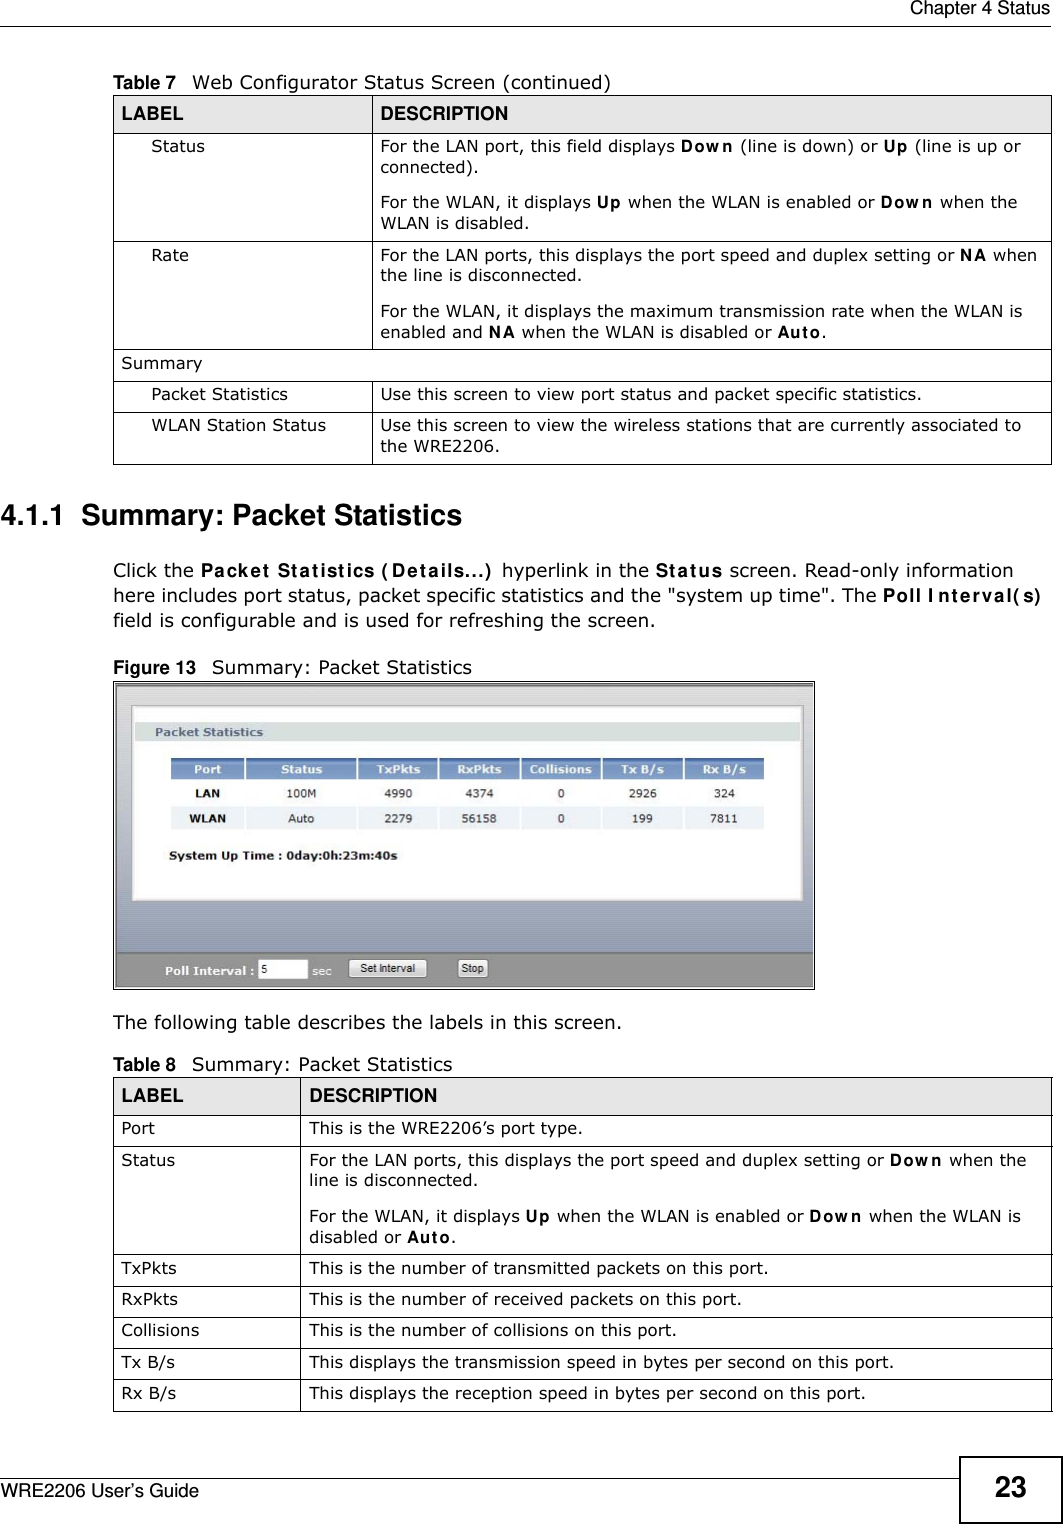  Chapter 4 StatusWRE2206 User’s Guide 234.1.1  Summary: Packet Statistics Click the Pa cket  St a t ist ics ( Det ails...)  hyperlink in the St at us screen. Read-only information here includes port status, packet specific statistics and the &quot;system up time&quot;. The Poll I nt er val( s)  field is configurable and is used for refreshing the screen.Figure 13   Summary: Packet Statistics The following table describes the labels in this screen.Status For the LAN port, this field displays Dow n  (line is down) or Up (line is up or connected).For the WLAN, it displays Up when the WLAN is enabled or Dow n when the WLAN is disabled.Rate For the LAN ports, this displays the port speed and duplex setting or N A when the line is disconnected.For the WLAN, it displays the maximum transmission rate when the WLAN is enabled and N A when the WLAN is disabled or Au t o.SummaryPacket Statistics Use this screen to view port status and packet specific statistics.WLAN Station Status Use this screen to view the wireless stations that are currently associated to the WRE2206.Table 7   Web Configurator Status Screen (continued) LABEL DESCRIPTIONTable 8   Summary: Packet StatisticsLABEL DESCRIPTIONPort This is the WRE2206’s port type.Status  For the LAN ports, this displays the port speed and duplex setting or Dow n when the line is disconnected.For the WLAN, it displays Up when the WLAN is enabled or Dow n when the WLAN is disabled or Au t o.TxPkts  This is the number of transmitted packets on this port.RxPkts  This is the number of received packets on this port.Collisions  This is the number of collisions on this port.Tx B/s  This displays the transmission speed in bytes per second on this port.Rx B/s This displays the reception speed in bytes per second on this port.